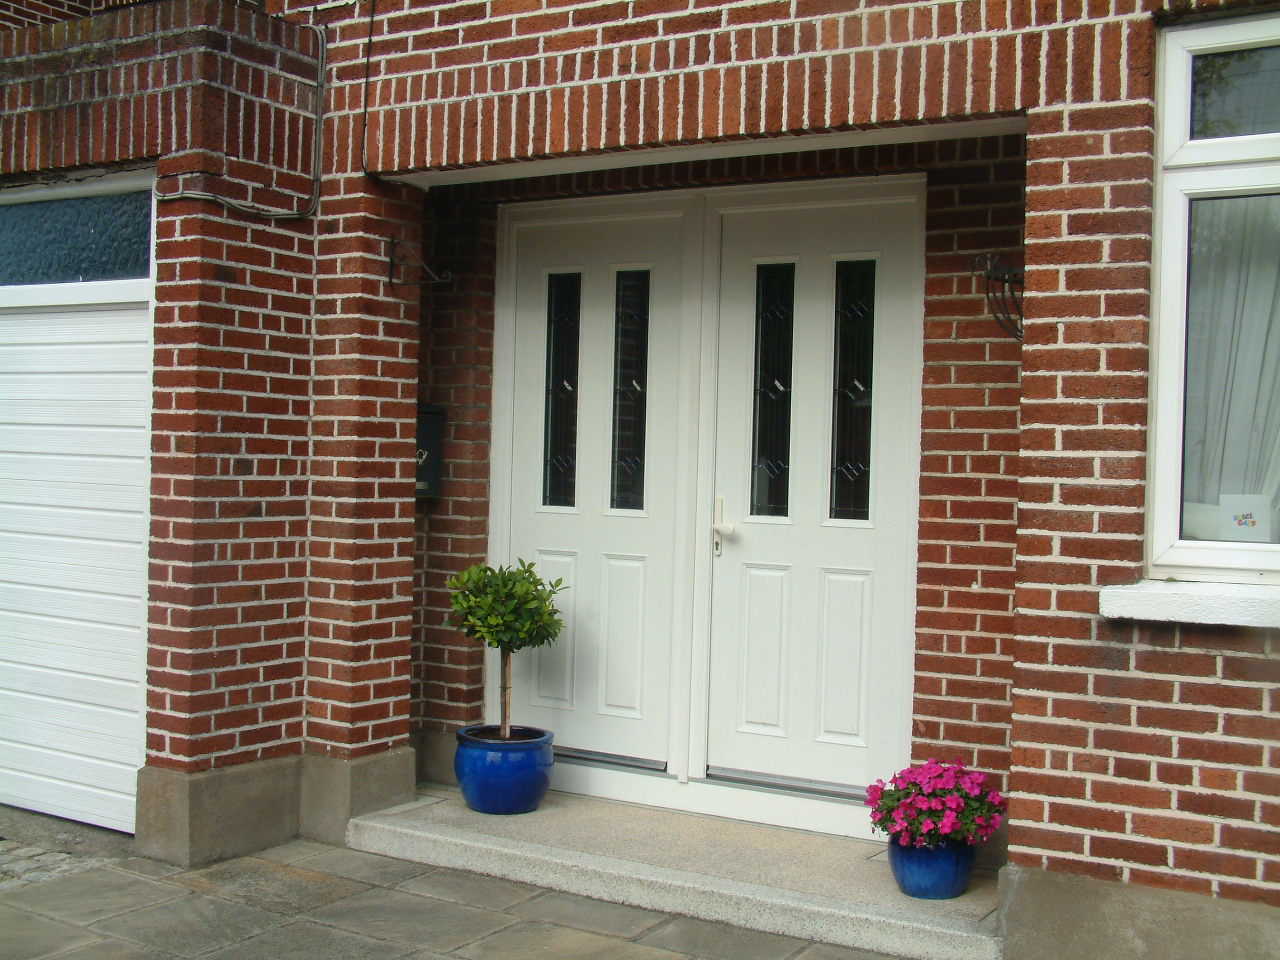 WHITE APEER APM2 COMPOSITE FRONT DOOR FITTED BY ASGARD WINDOWS IN DUBLIN.